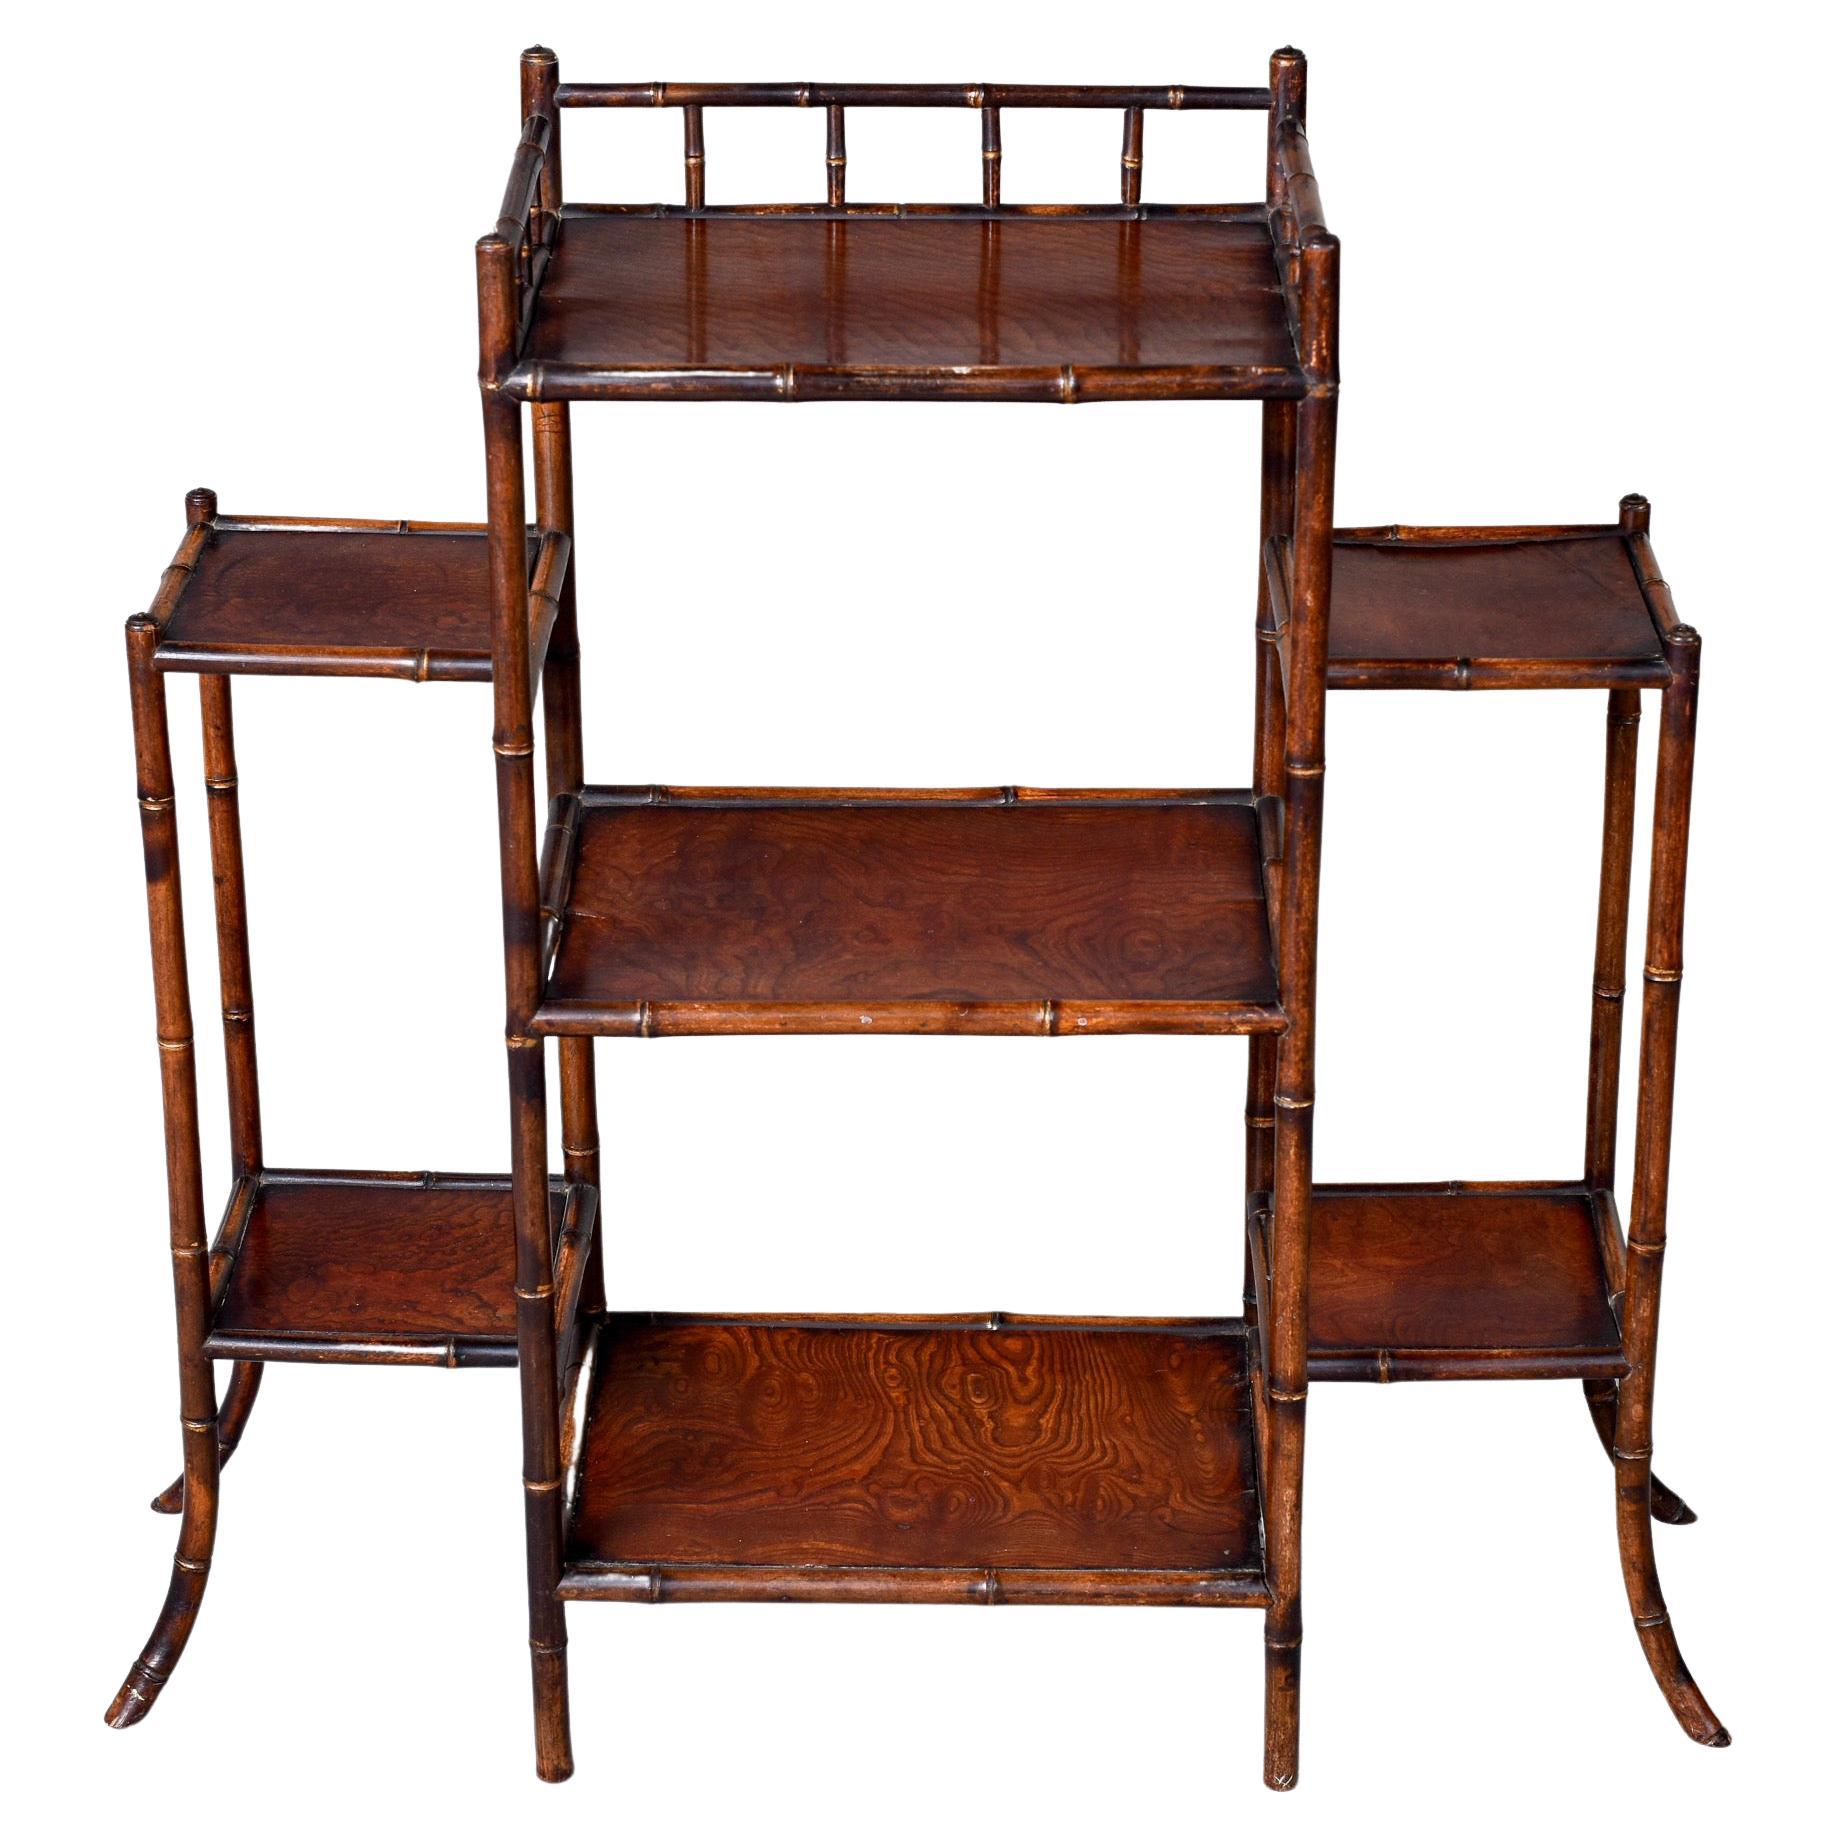 Early 20th C English Bamboo Etagere Plant Display Stand For Sale